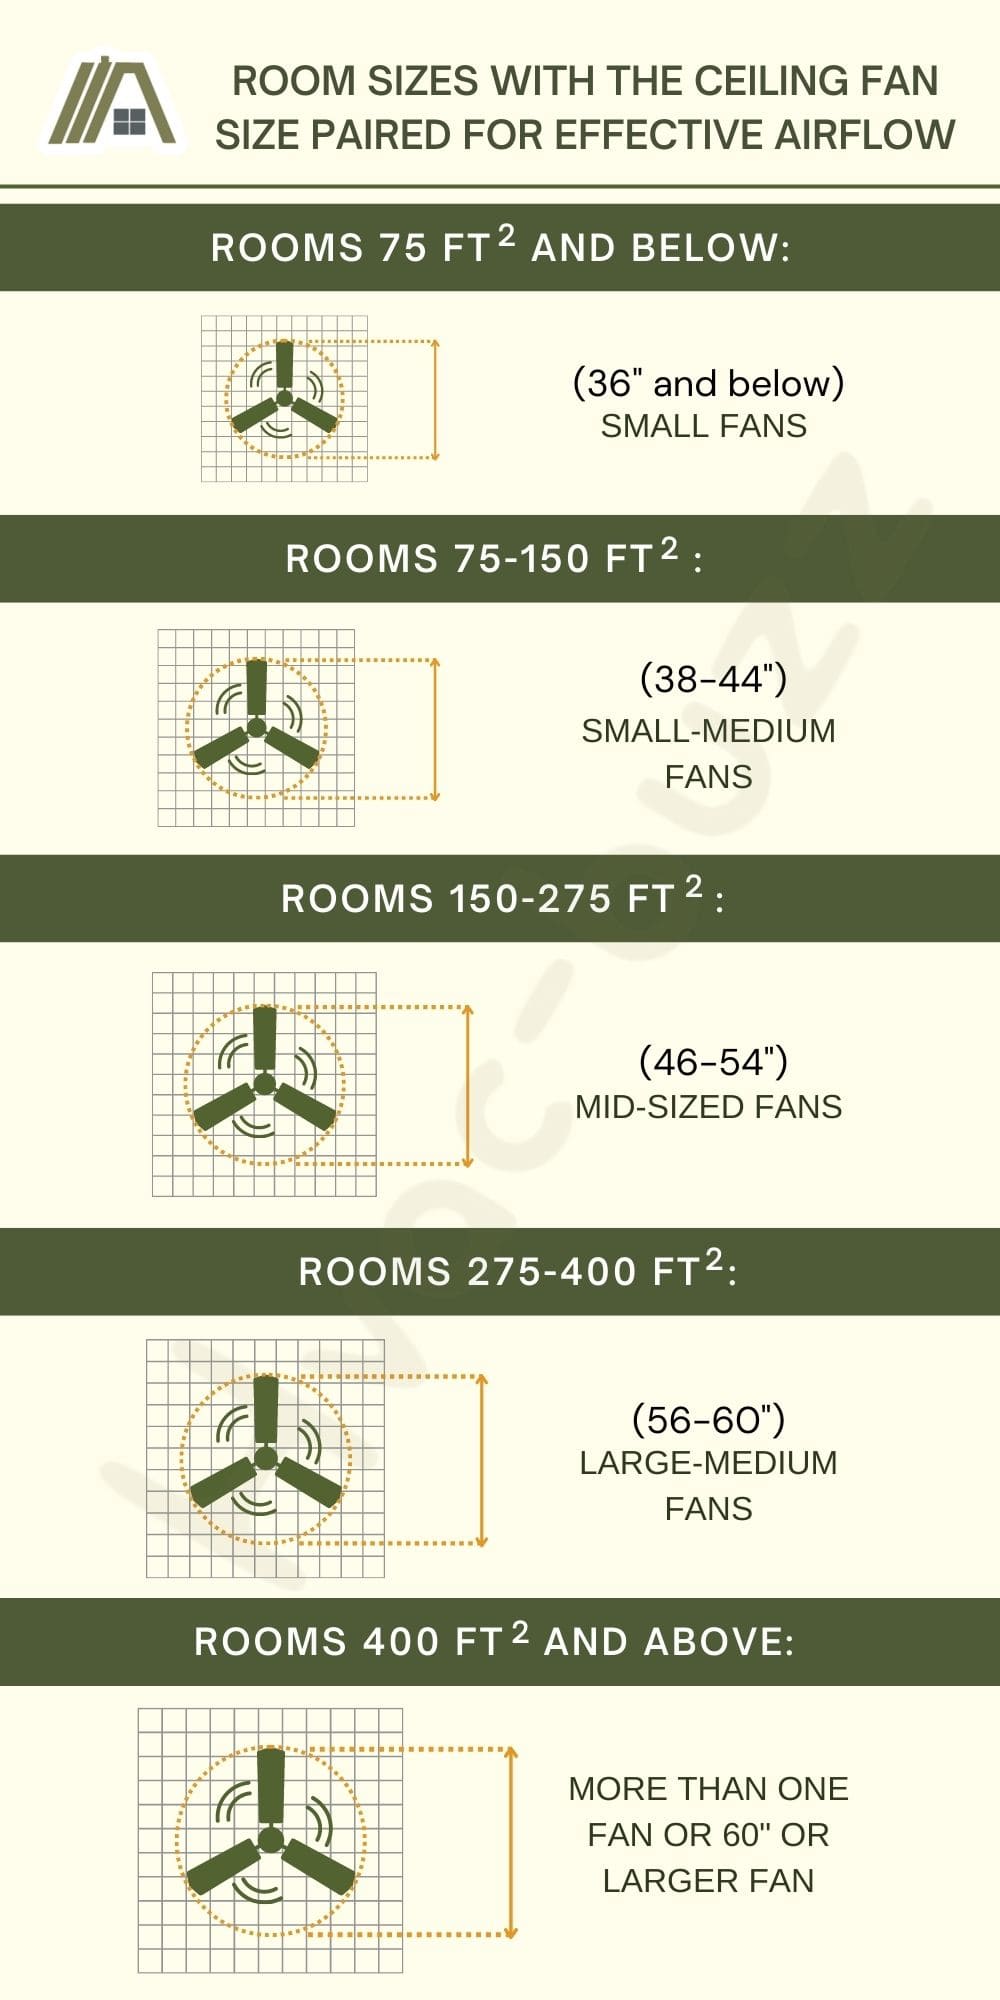 Room sizes with the ceiling fan size paired for effective airflow